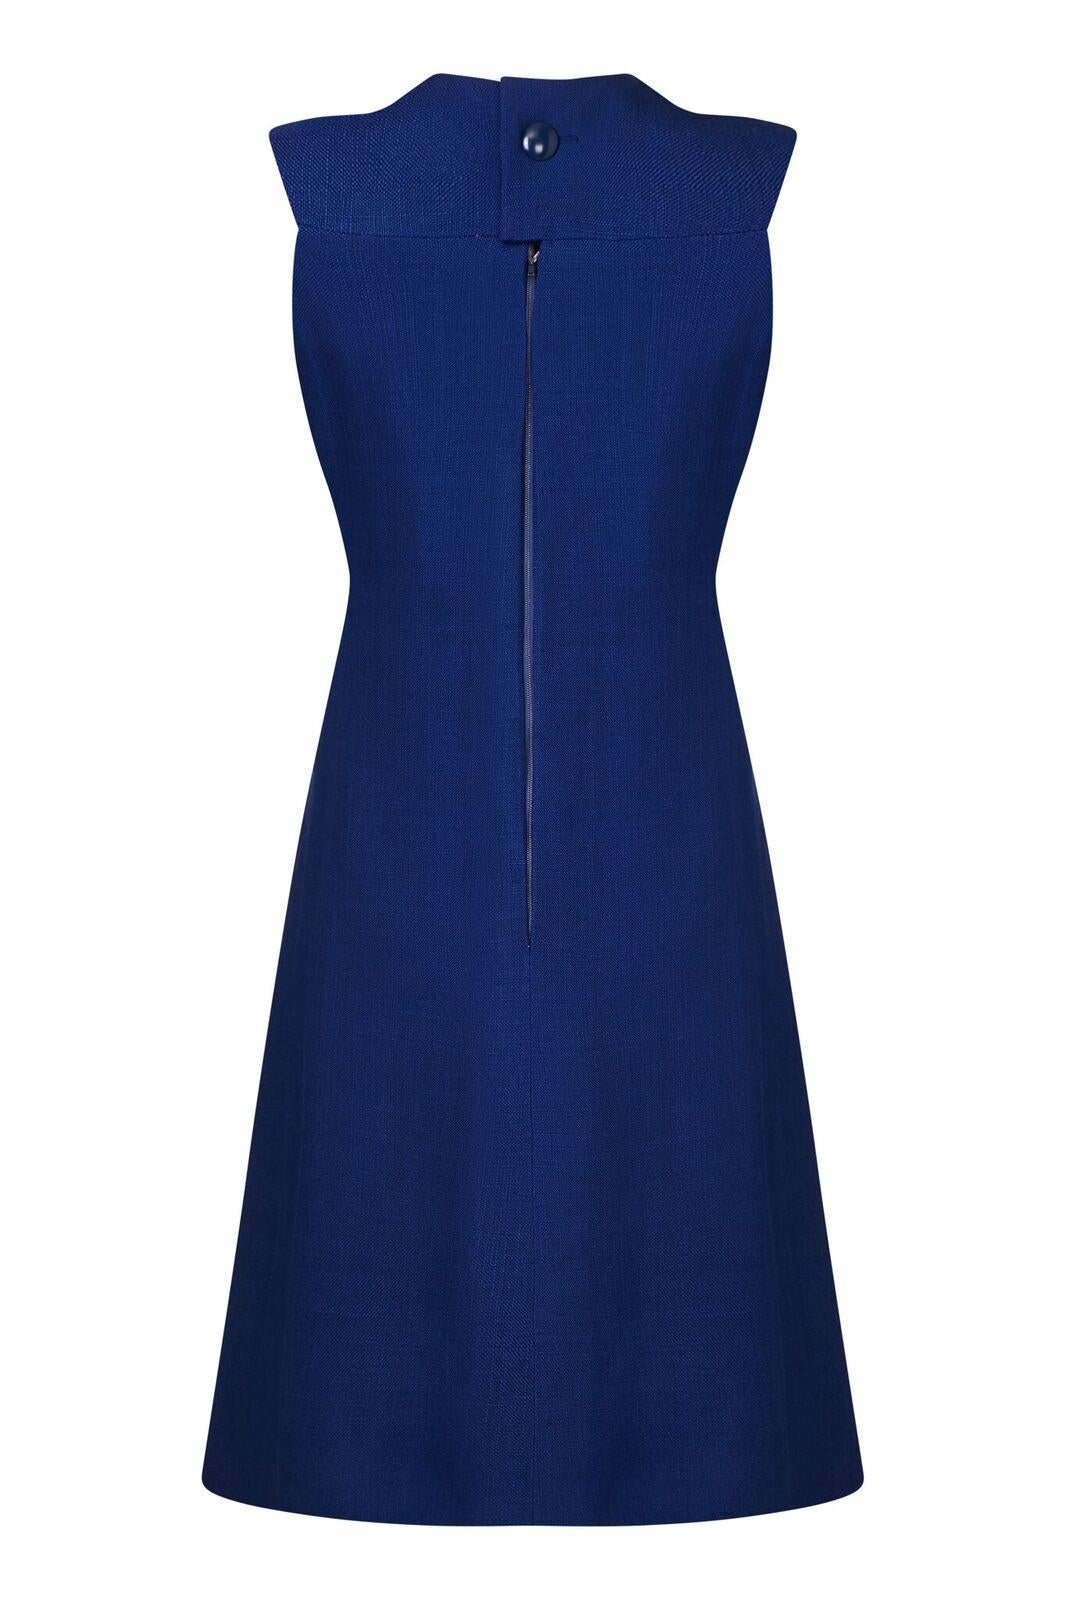 This stylish 1960s Demi Couture Patron Original labelled and numbered dress by Christian Dior is a magnificent piece of tailoring and is in impeccable condition. The high quality heavy linen fabric in French Blue has retained all of its vibrancy and